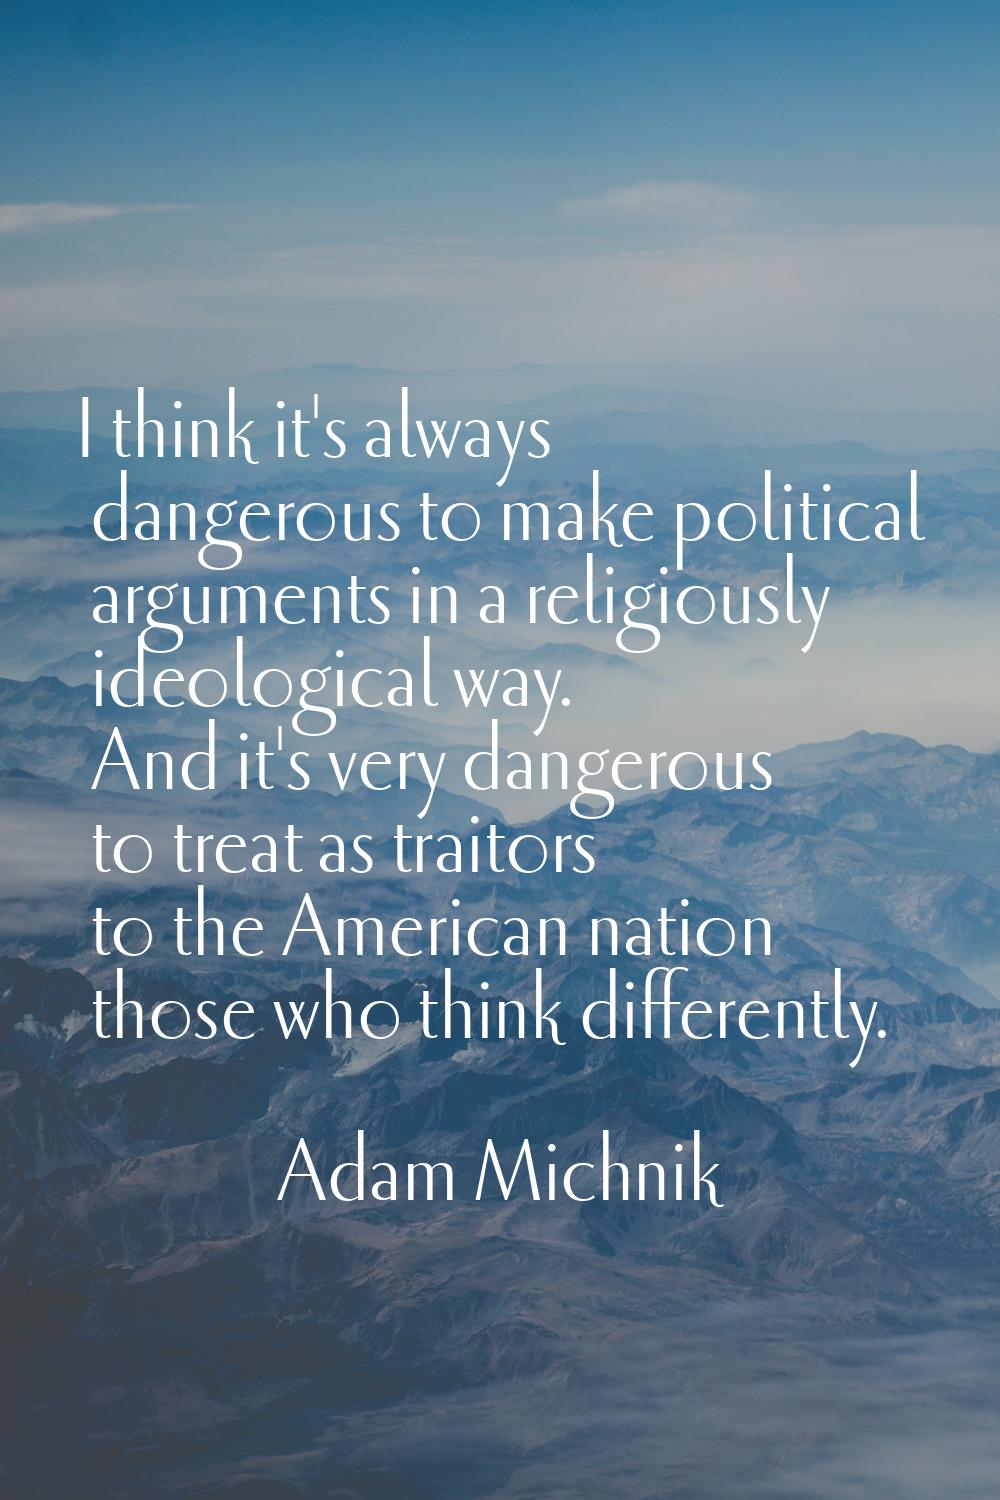 I think it's always dangerous to make political arguments in a religiously ideological way. And it'